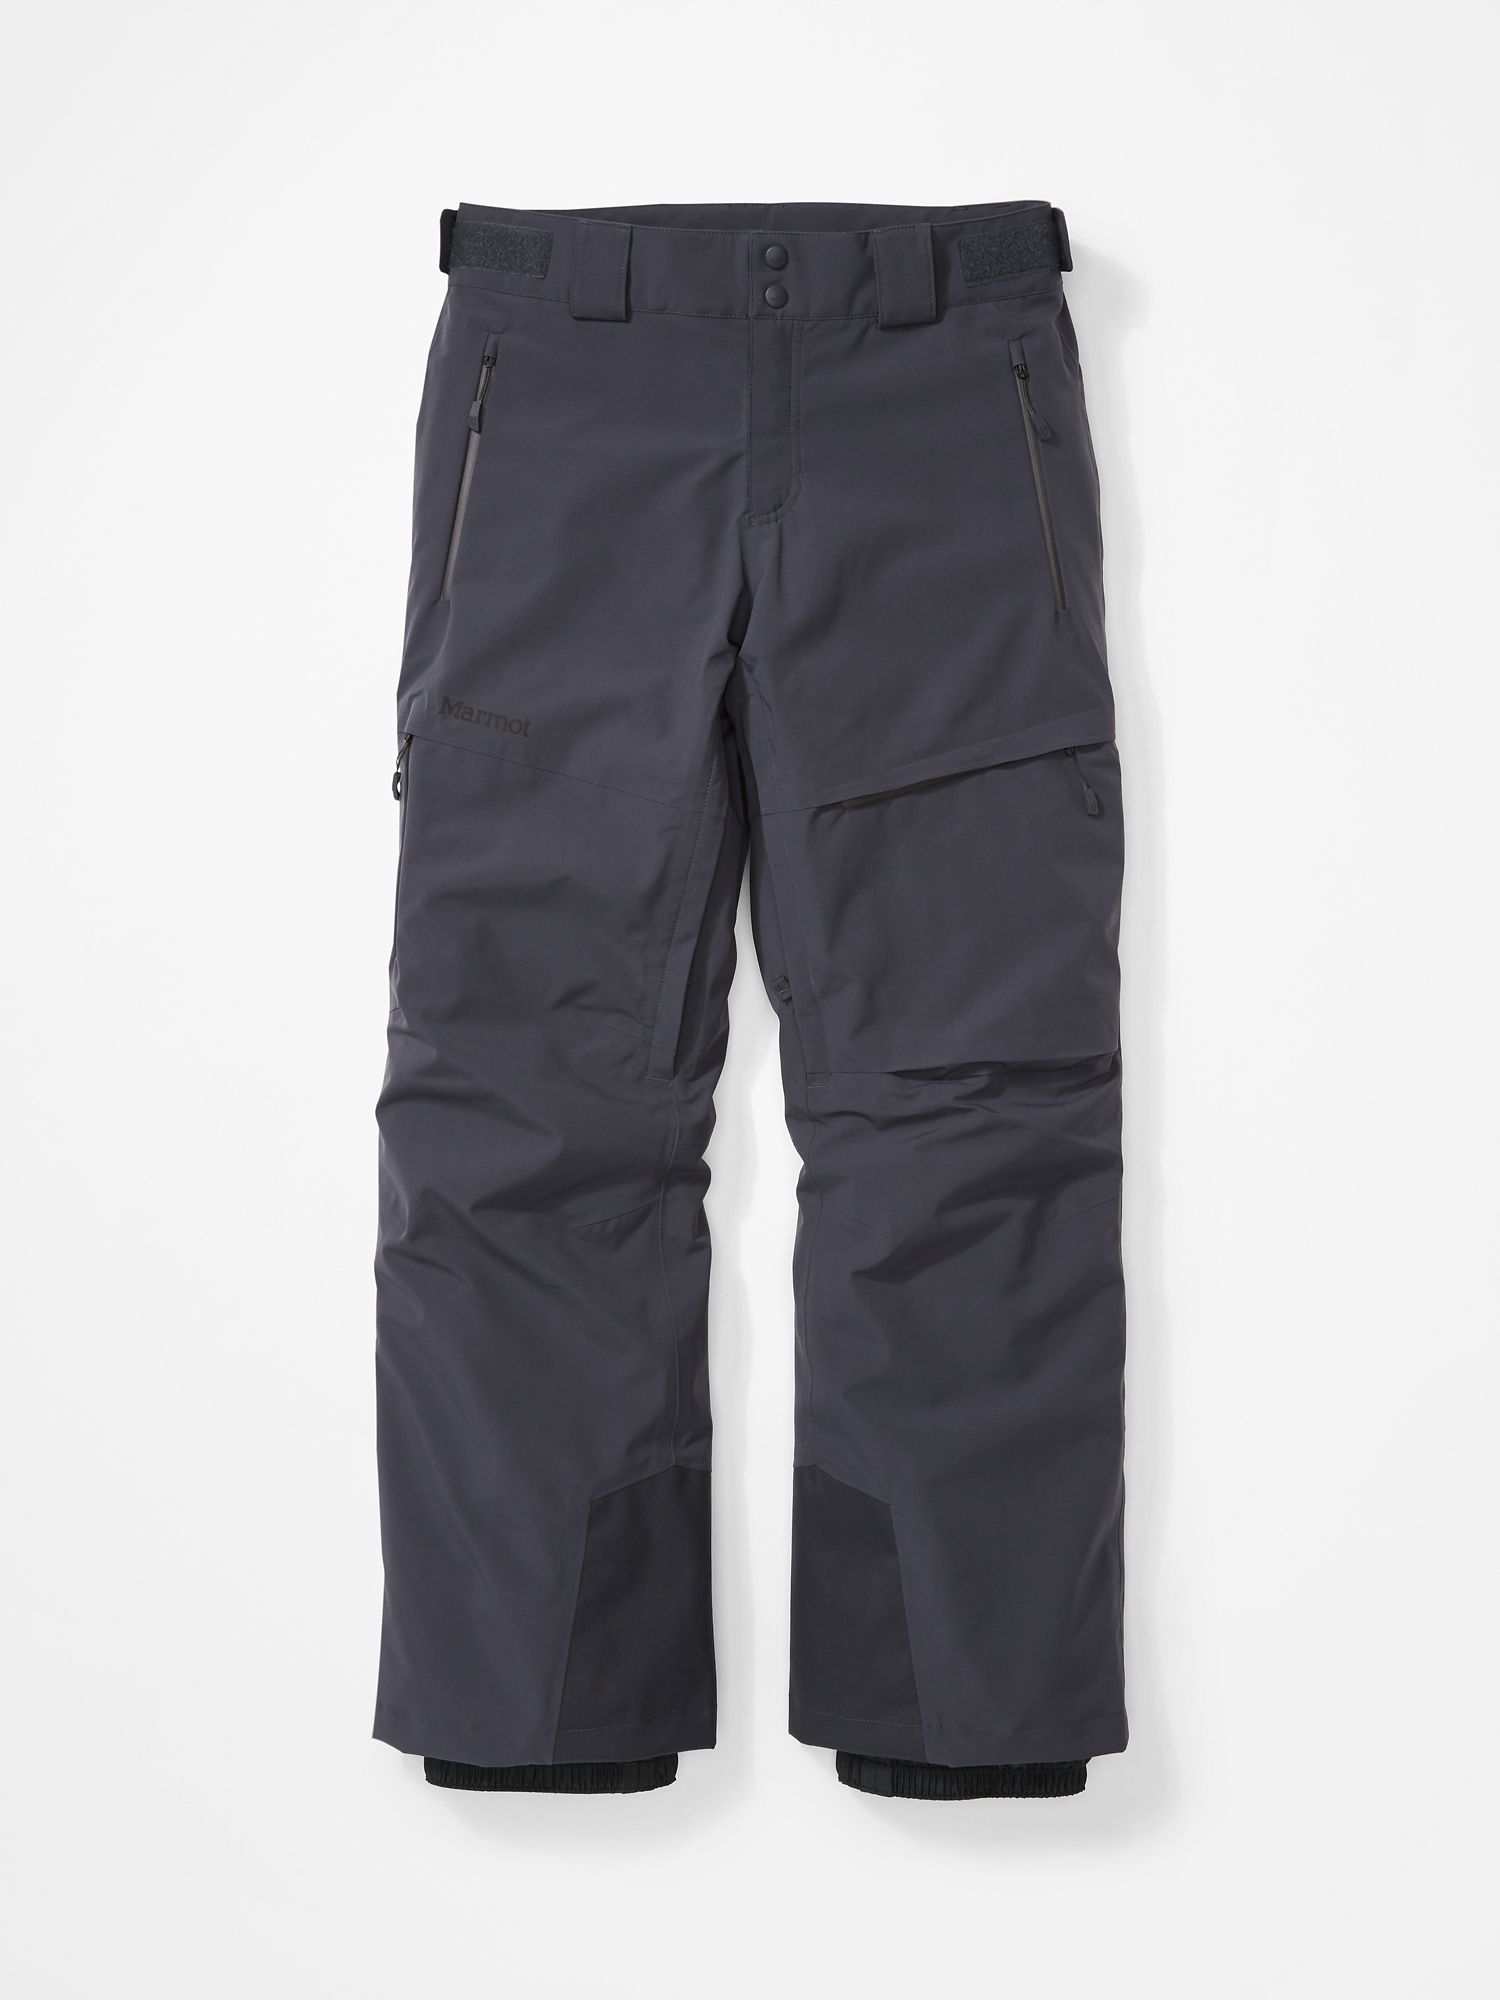 black insulated cargo pants